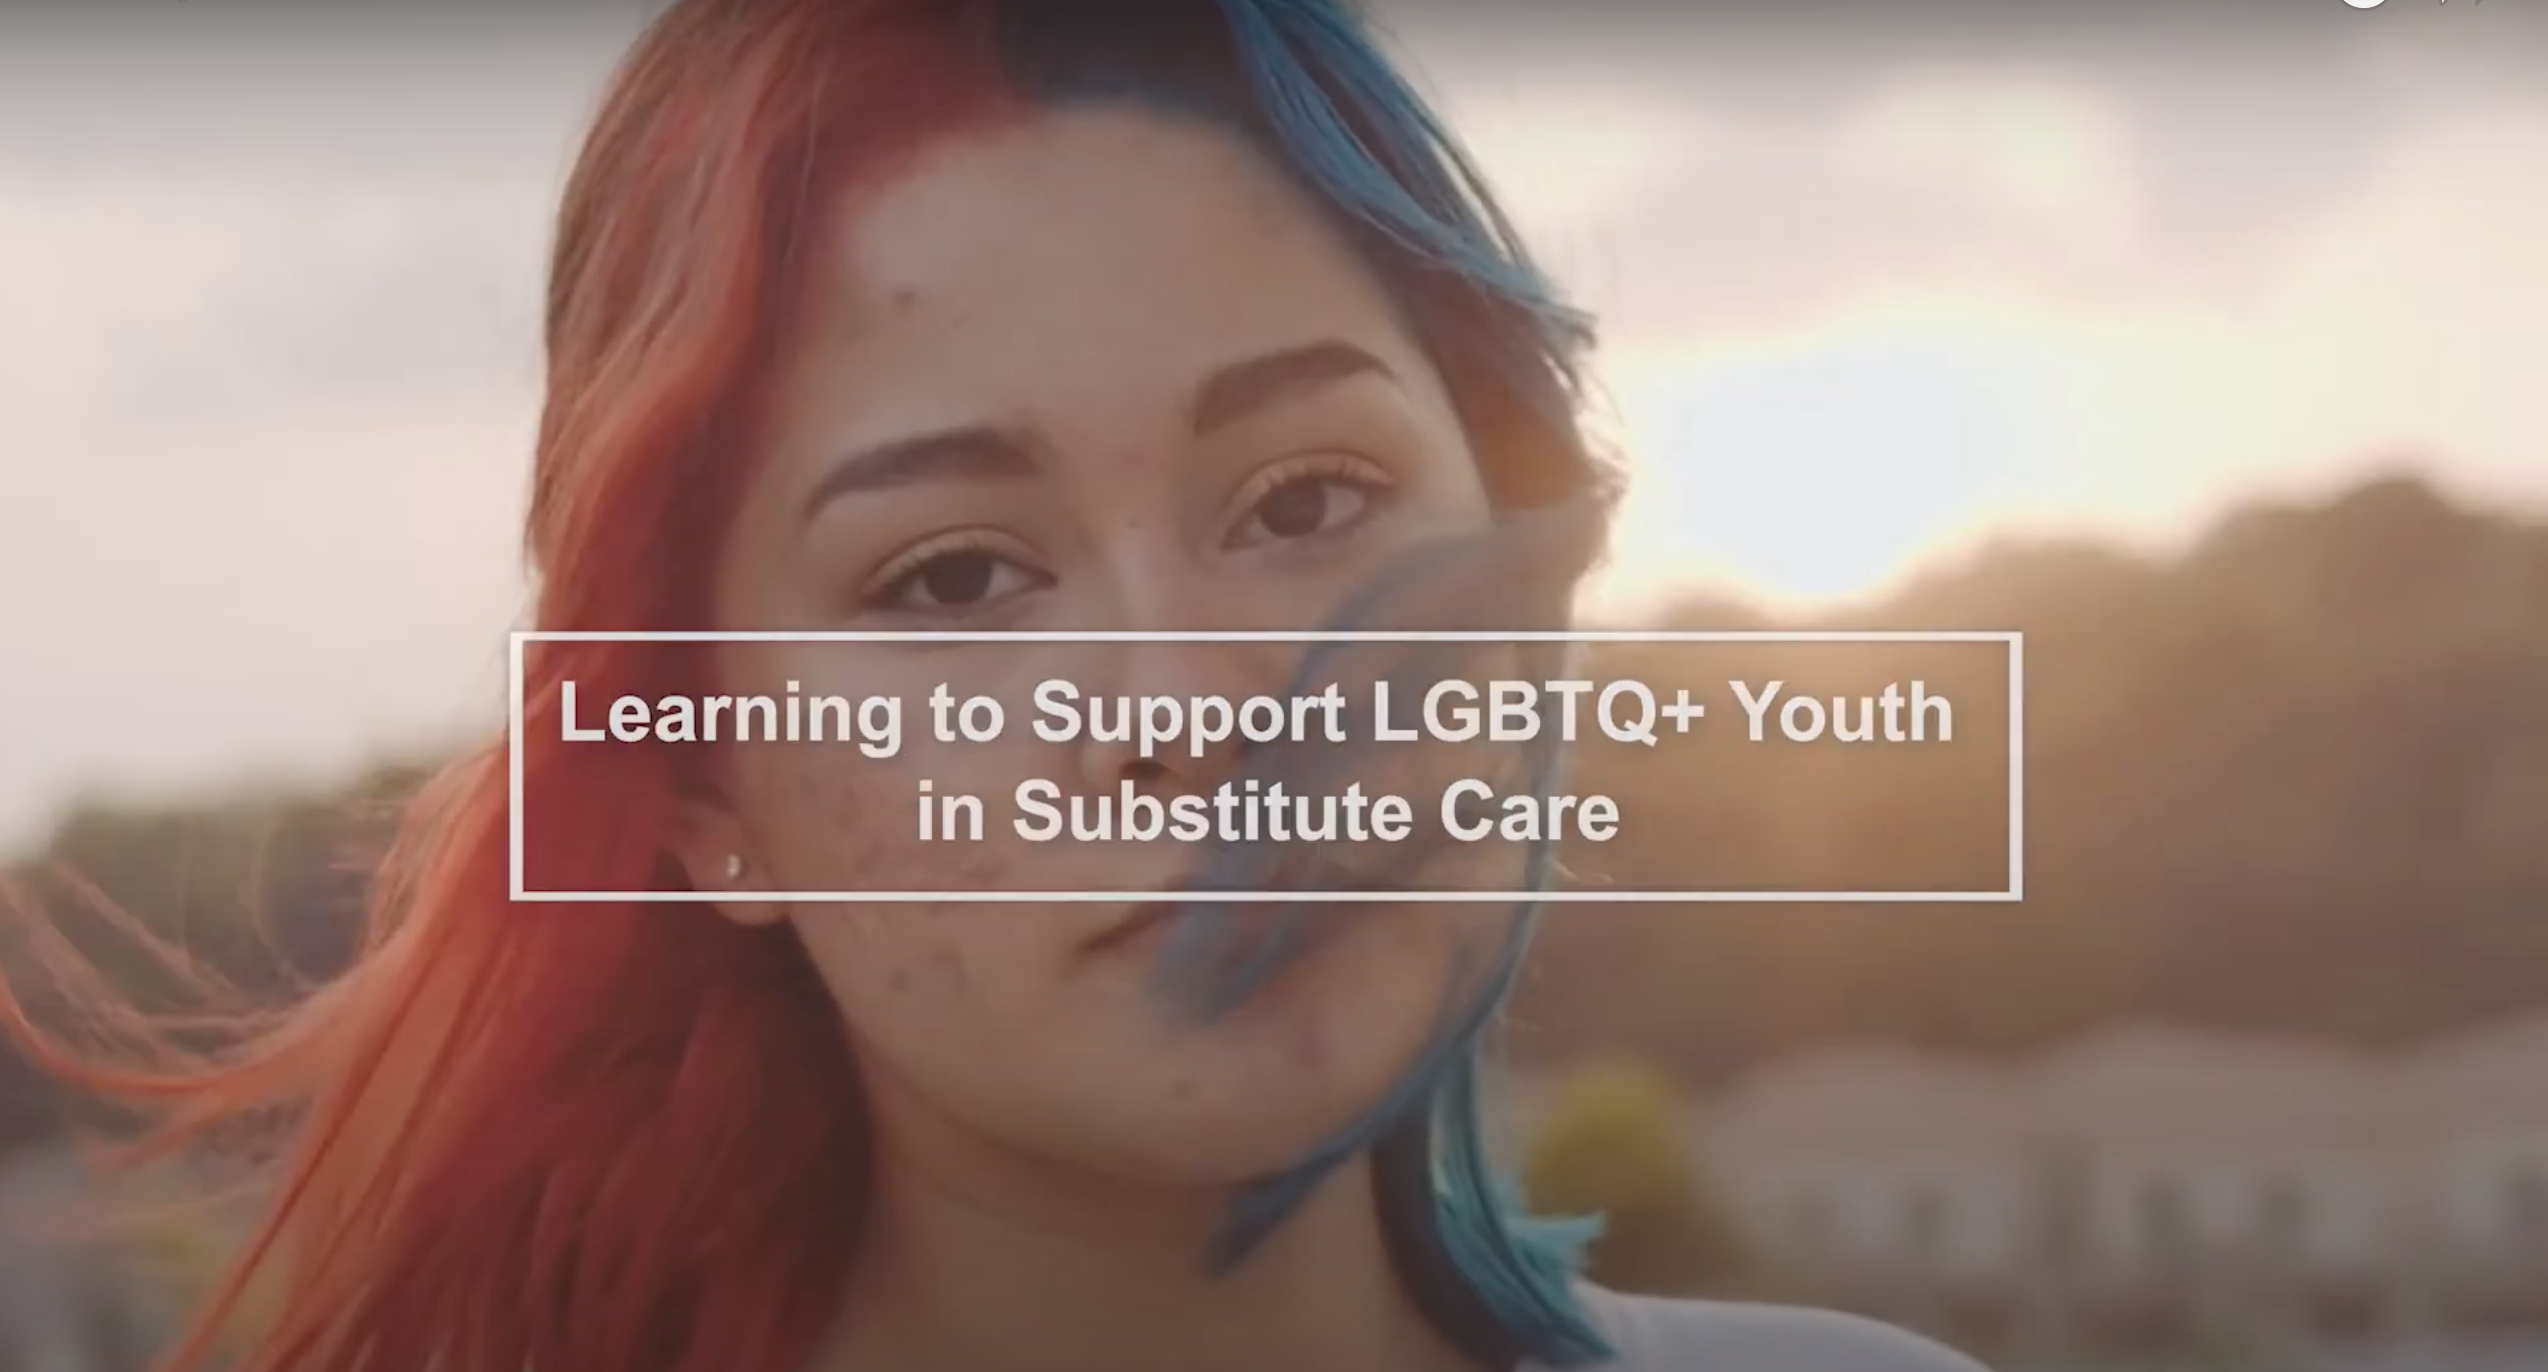 Still photo of LGBTQ+ youth with text reading "Learning to support LGBTQ+ in Substitute care"